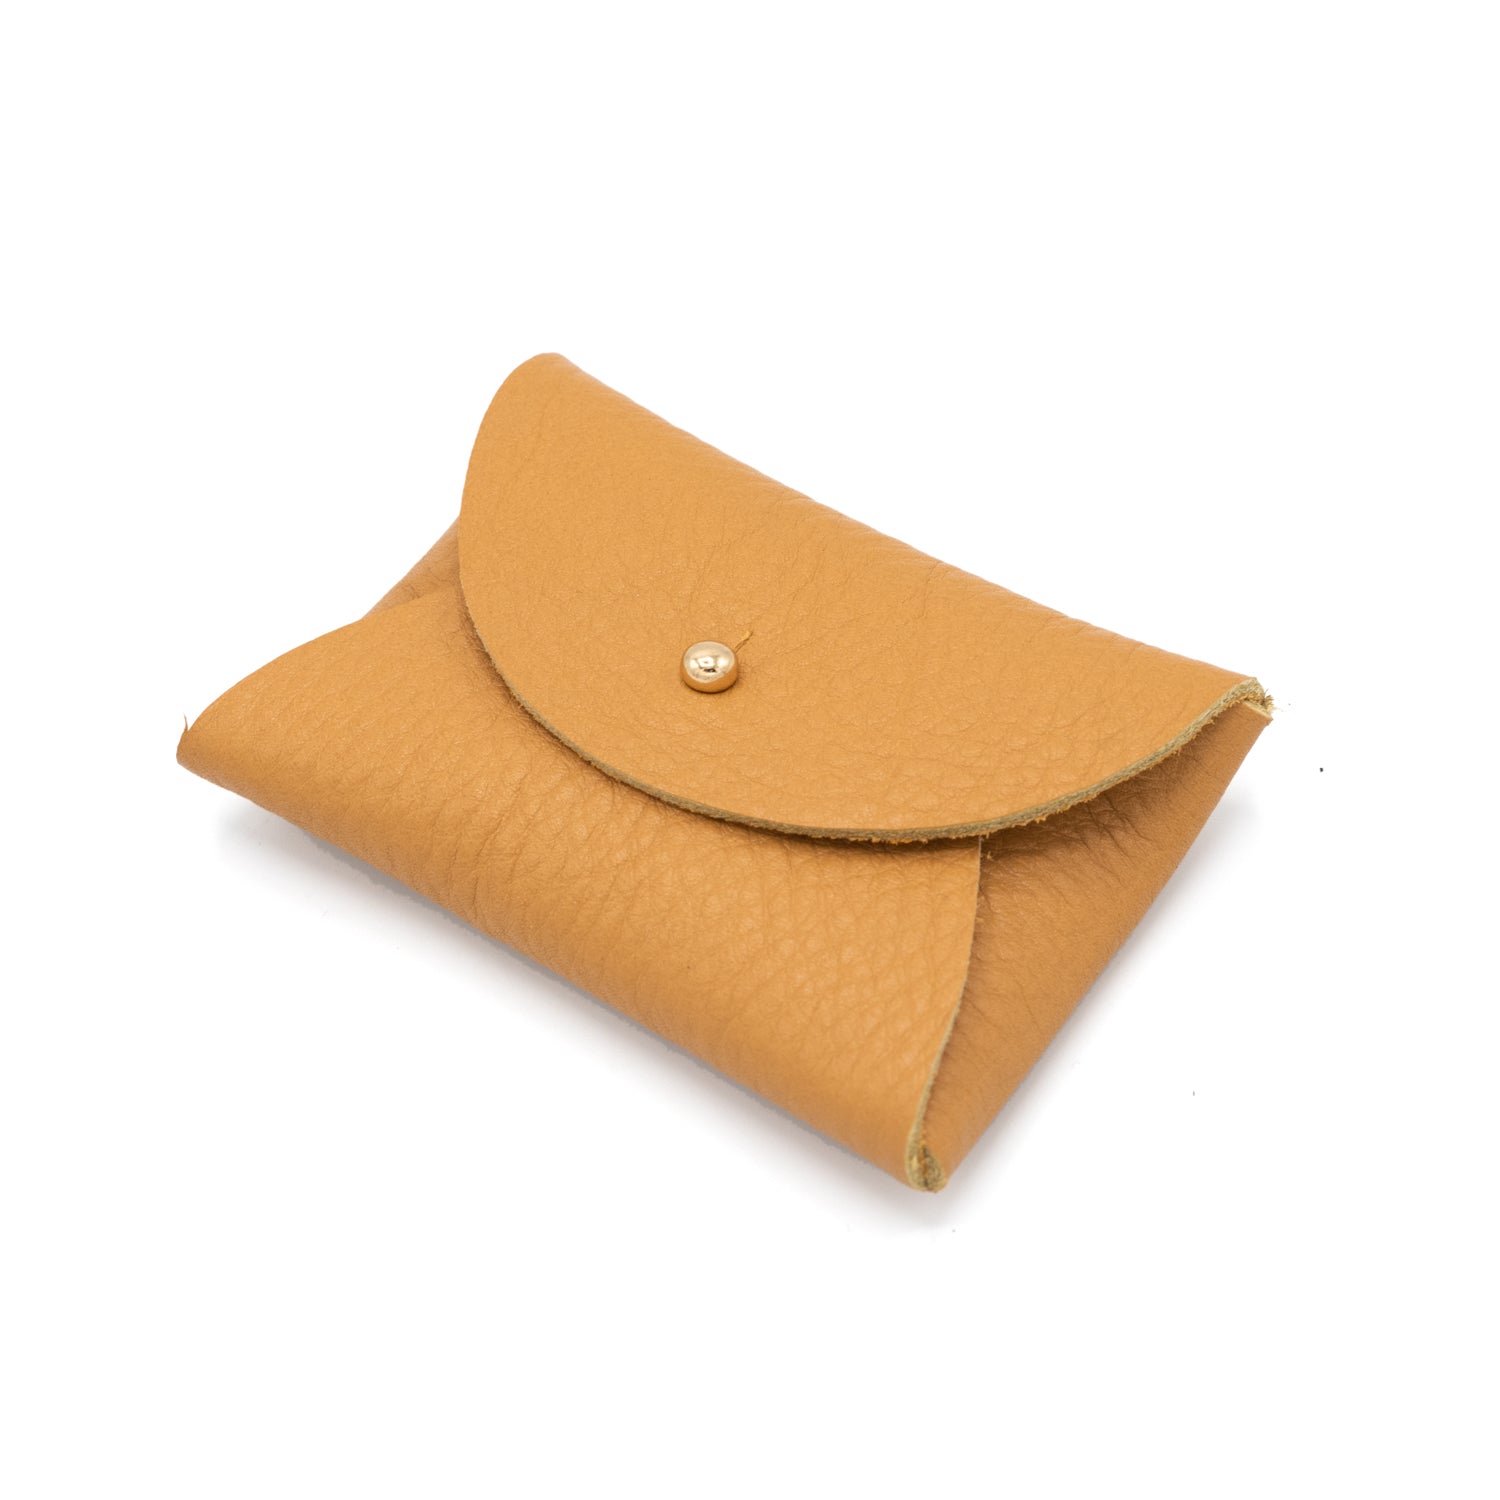 Image of a tan leather rectangular purse with a gold button against a white backdrop